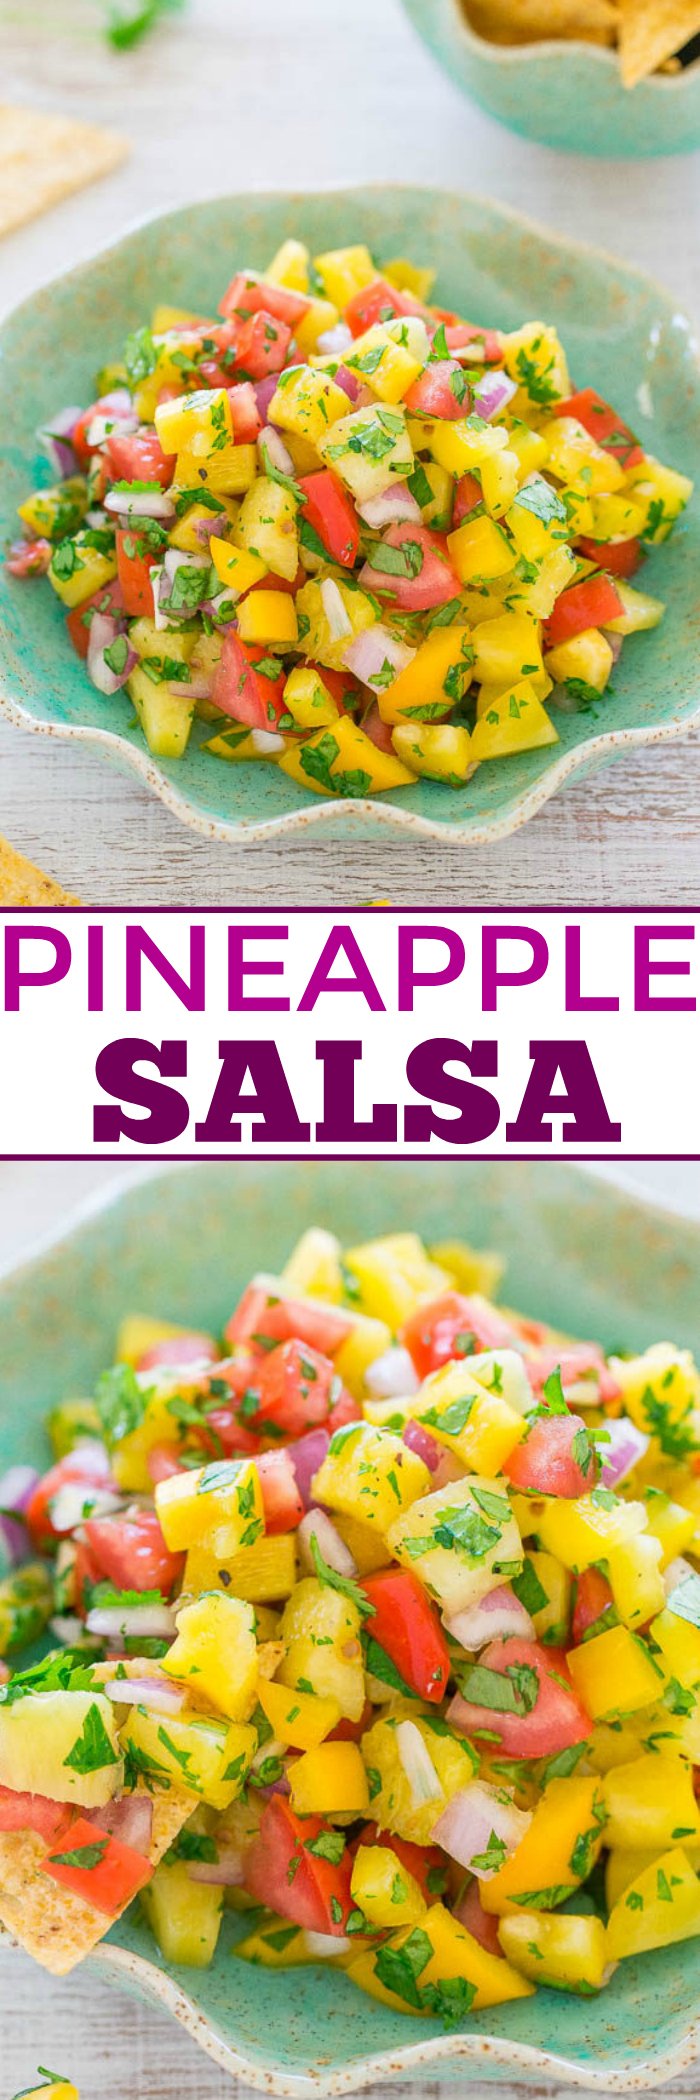 Pineapple Salsa - You won't be able to resist this EASY salsa with pineapple, bell peppers, tomatoes, and more!! It tastes like a TROPICAL vacation! Ready in 5 minutes, healthy, and PERFECT for parties!!